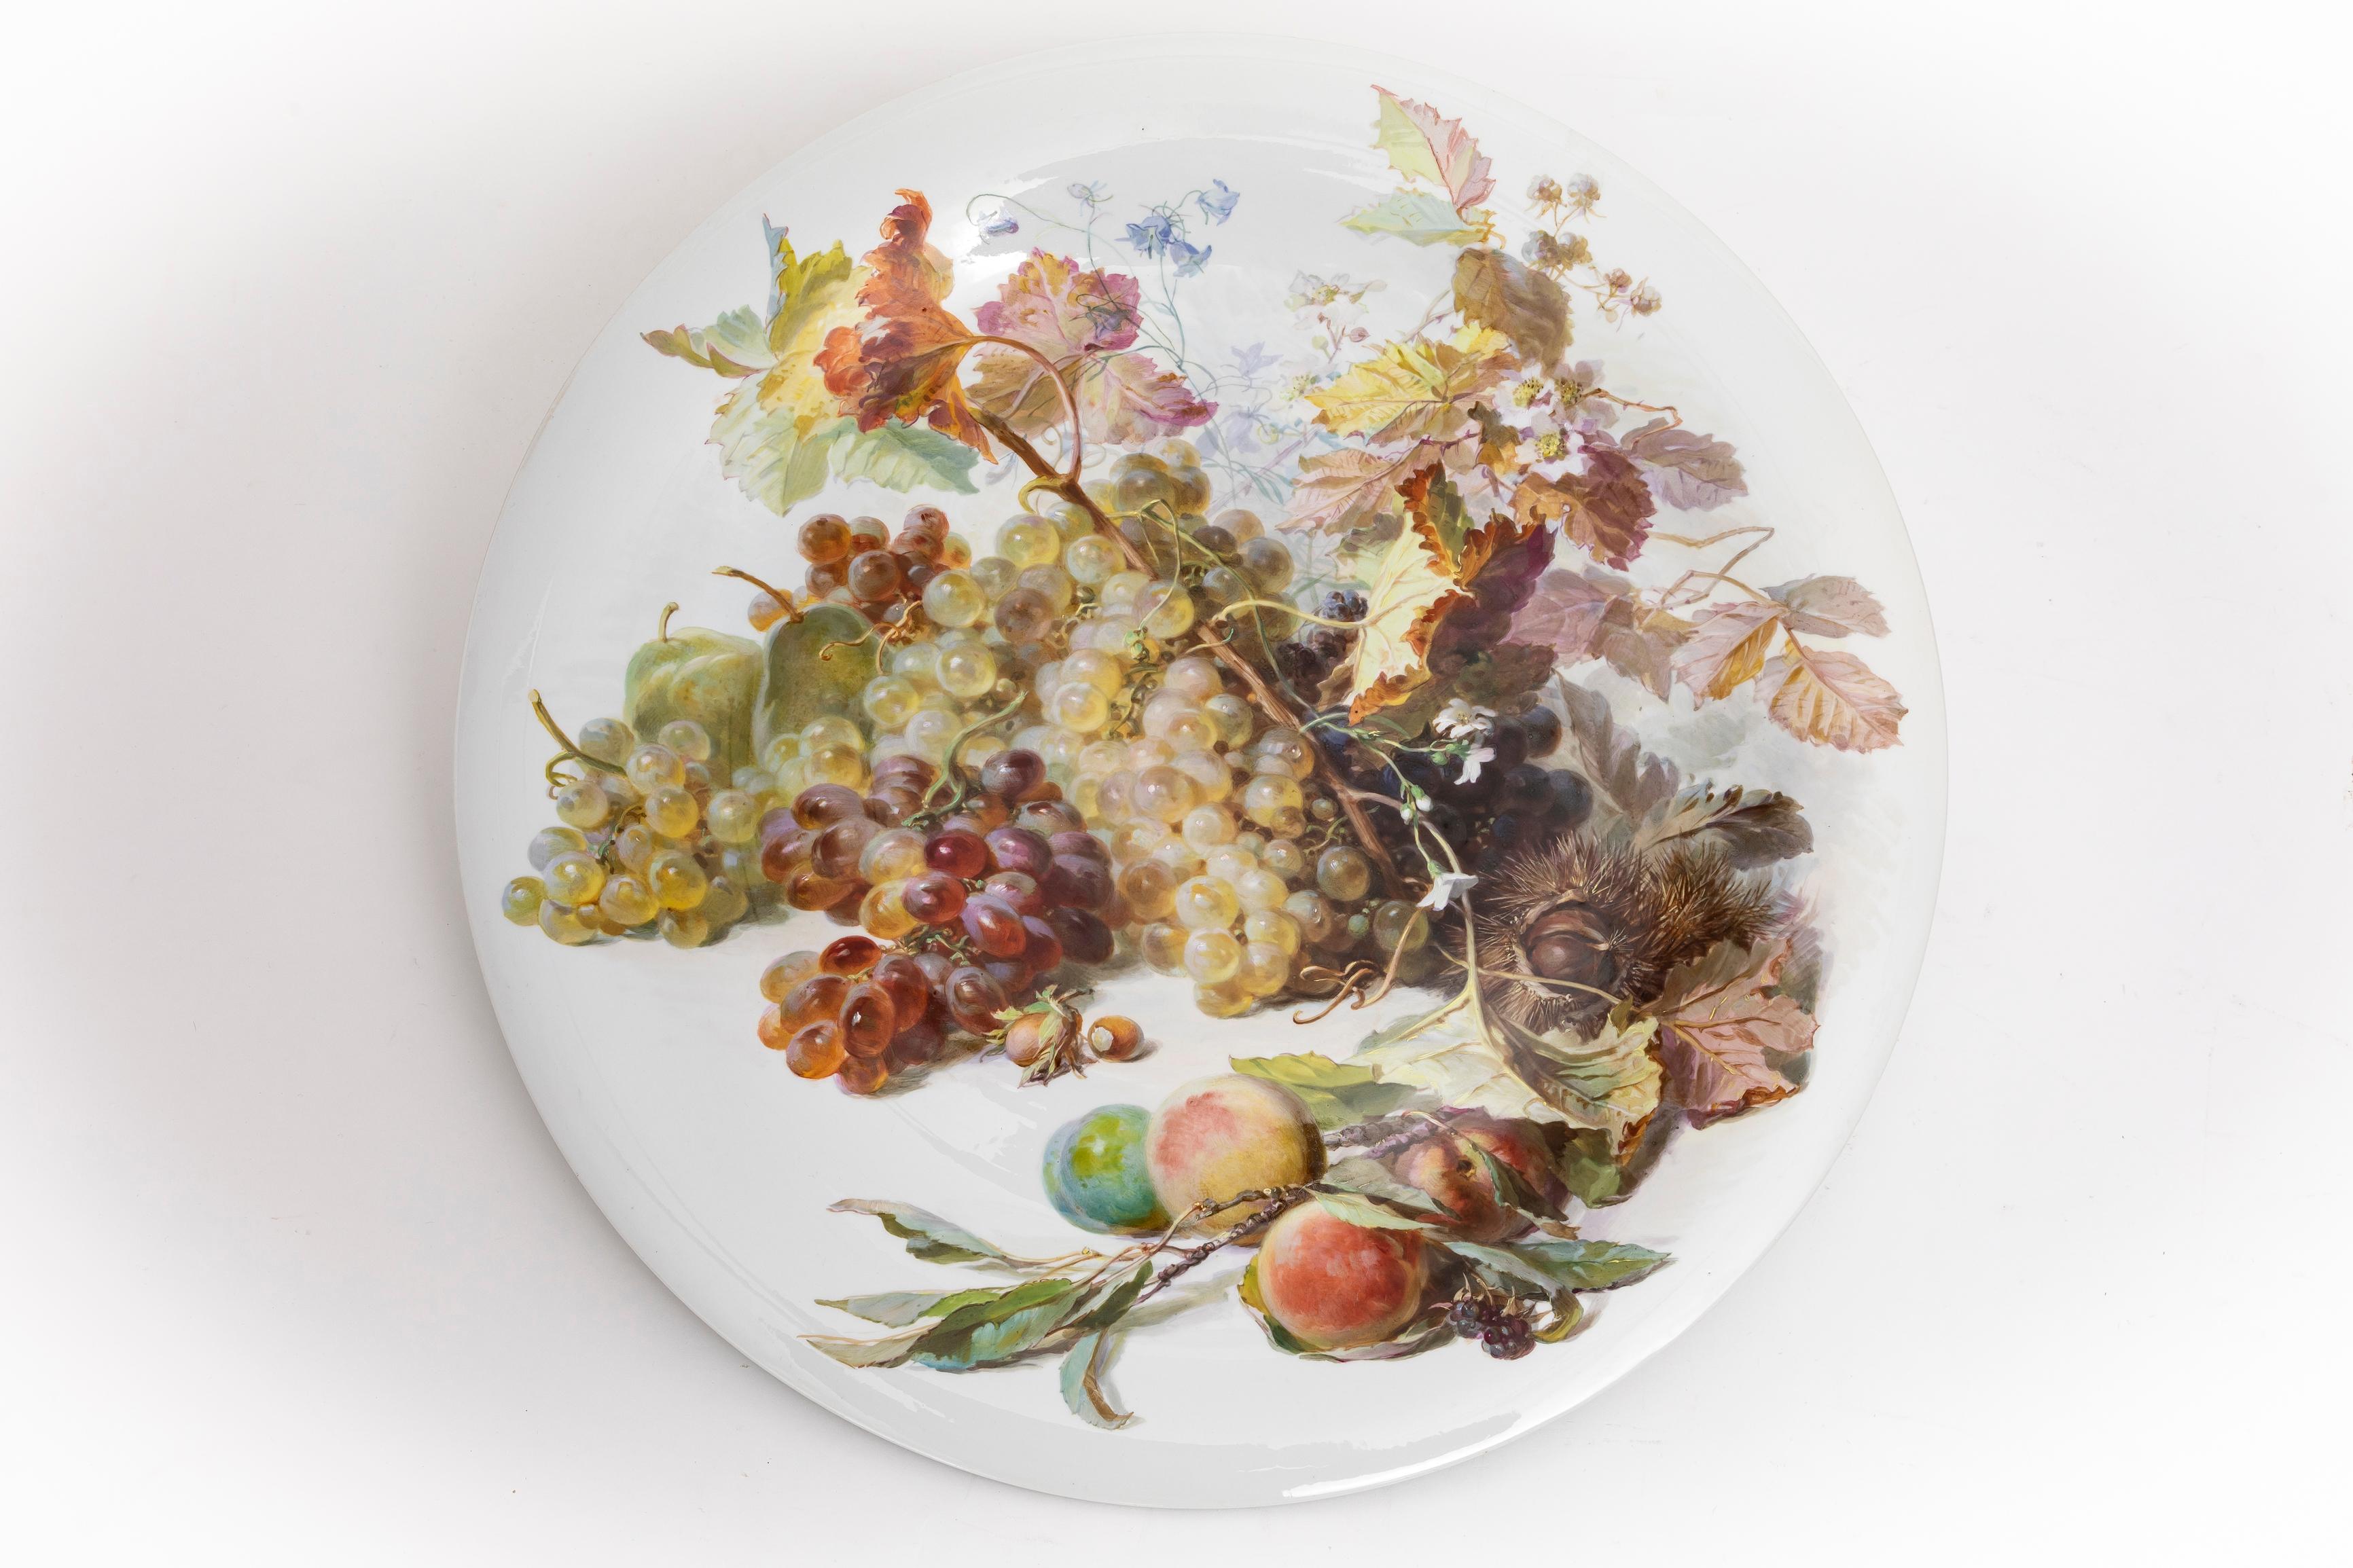 An Incredible and Large 19th Century Meissen Porcelain Still Life Decorated Charger, By Julius Eduard Braunsdorf.  This remarkable charger stands as a testament to the artistic mastery and precision craftsmanship that defined the renowned Meissen